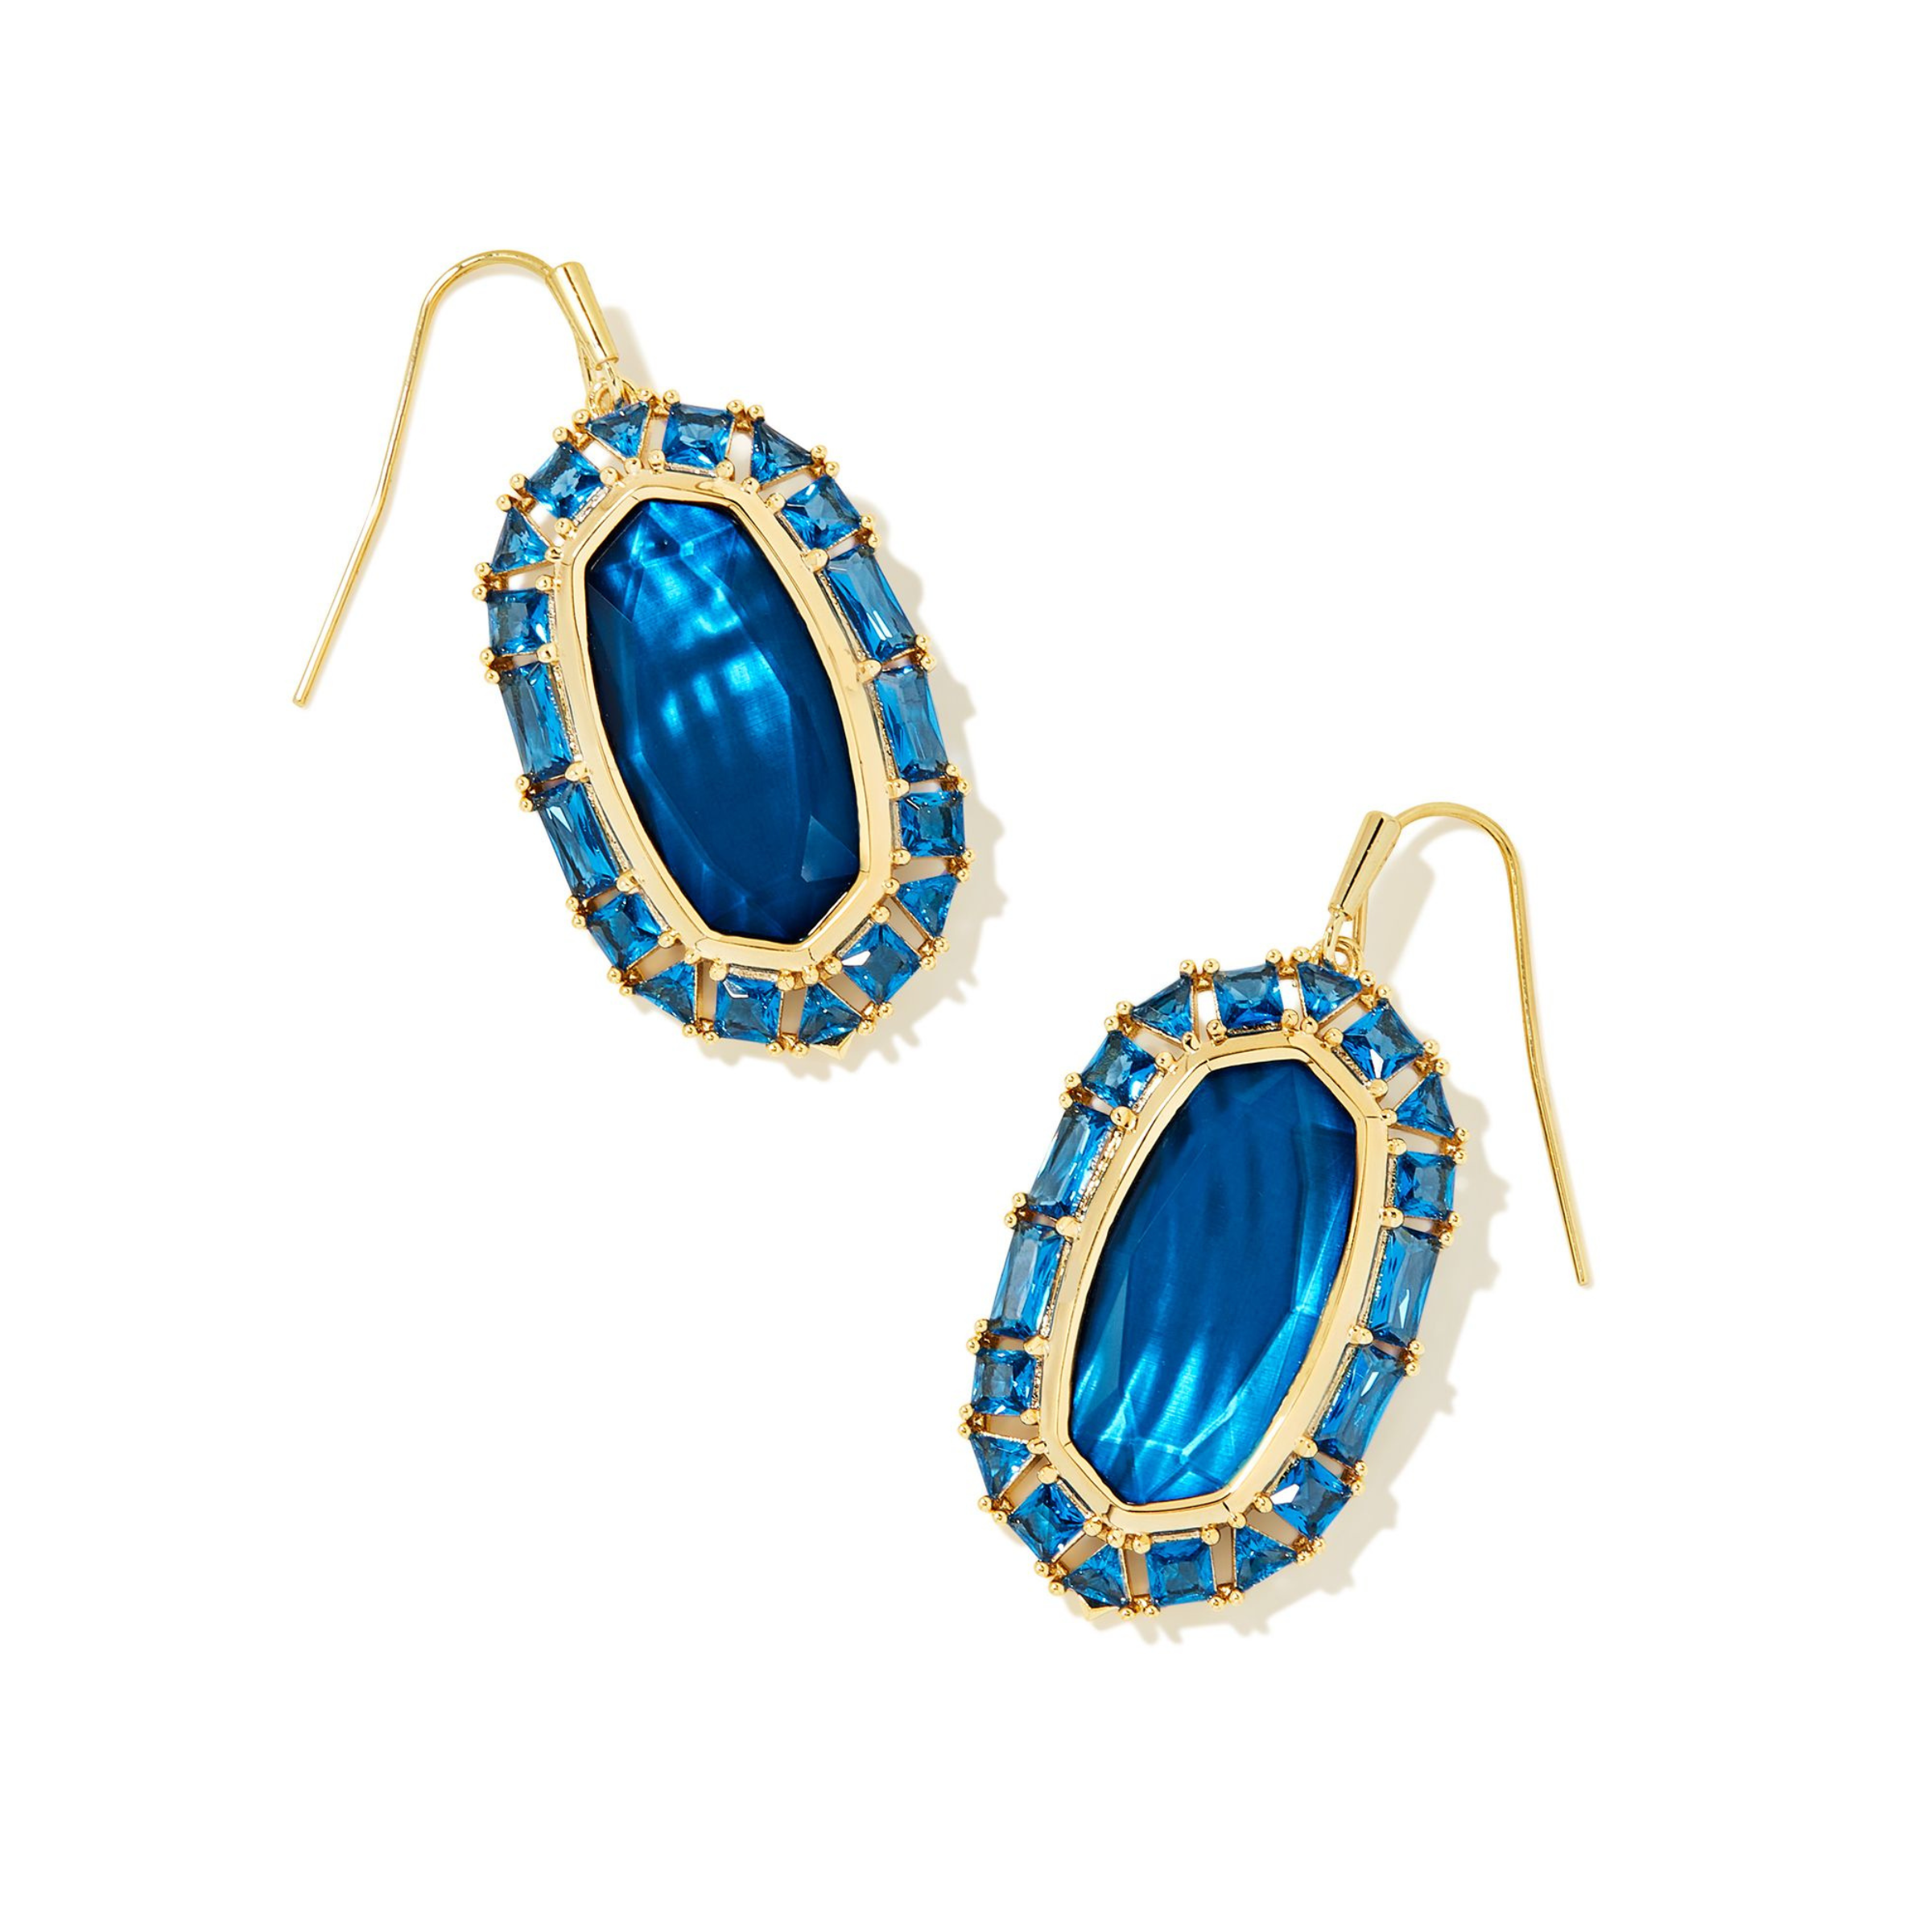 Gold, crystal frame drop earrings with sea blue illusion center stone pictured on a white background.